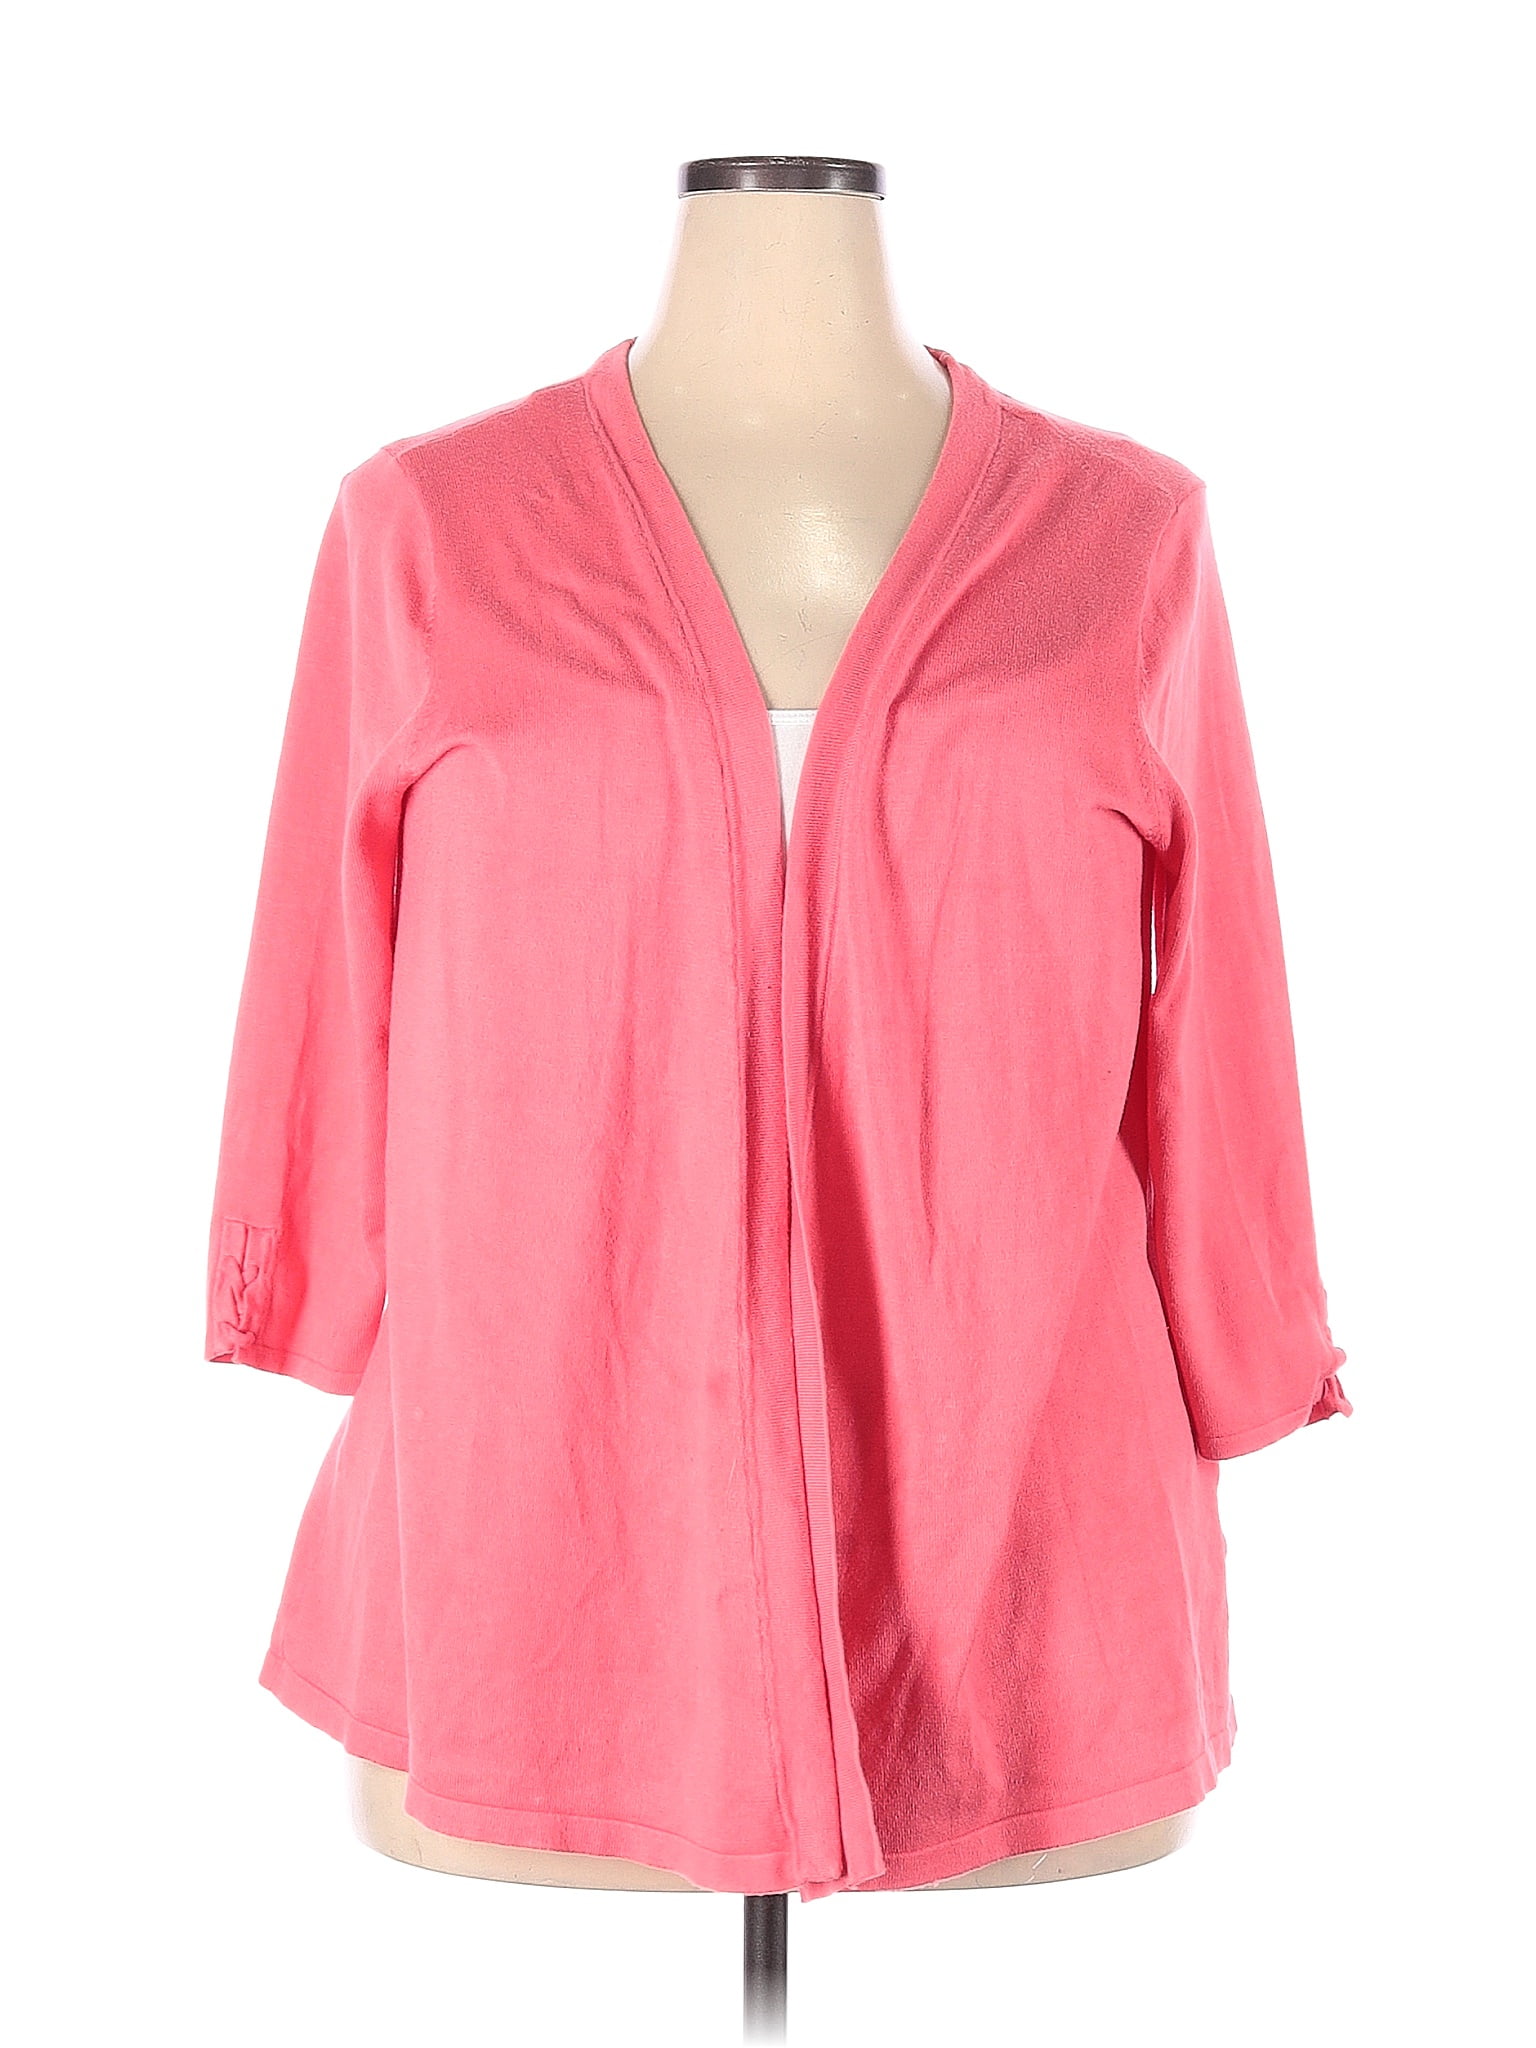 Lety & Me Color Block Solid Pink Cardigan Size 2X (Plus) - 62% off ...